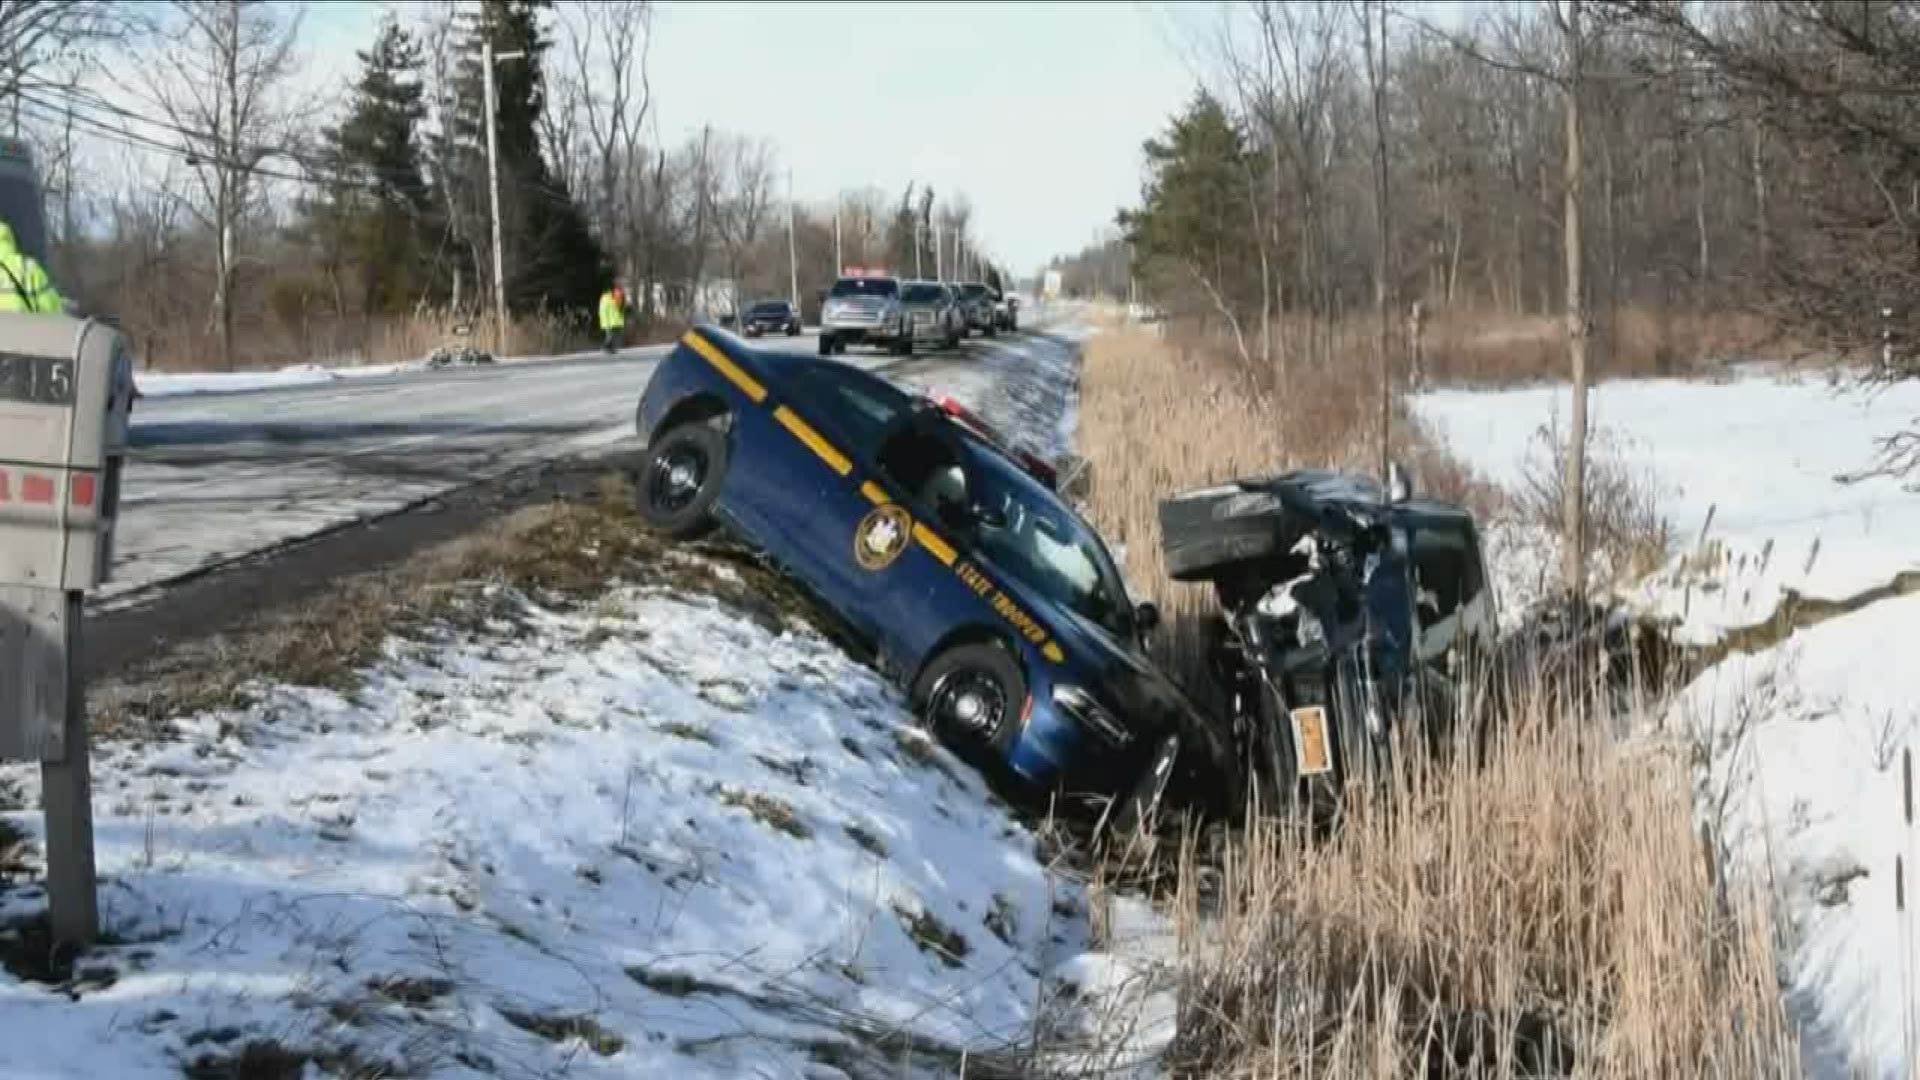 State Police say both drivers were taken a hospital and treated for what were considered minor injuries.